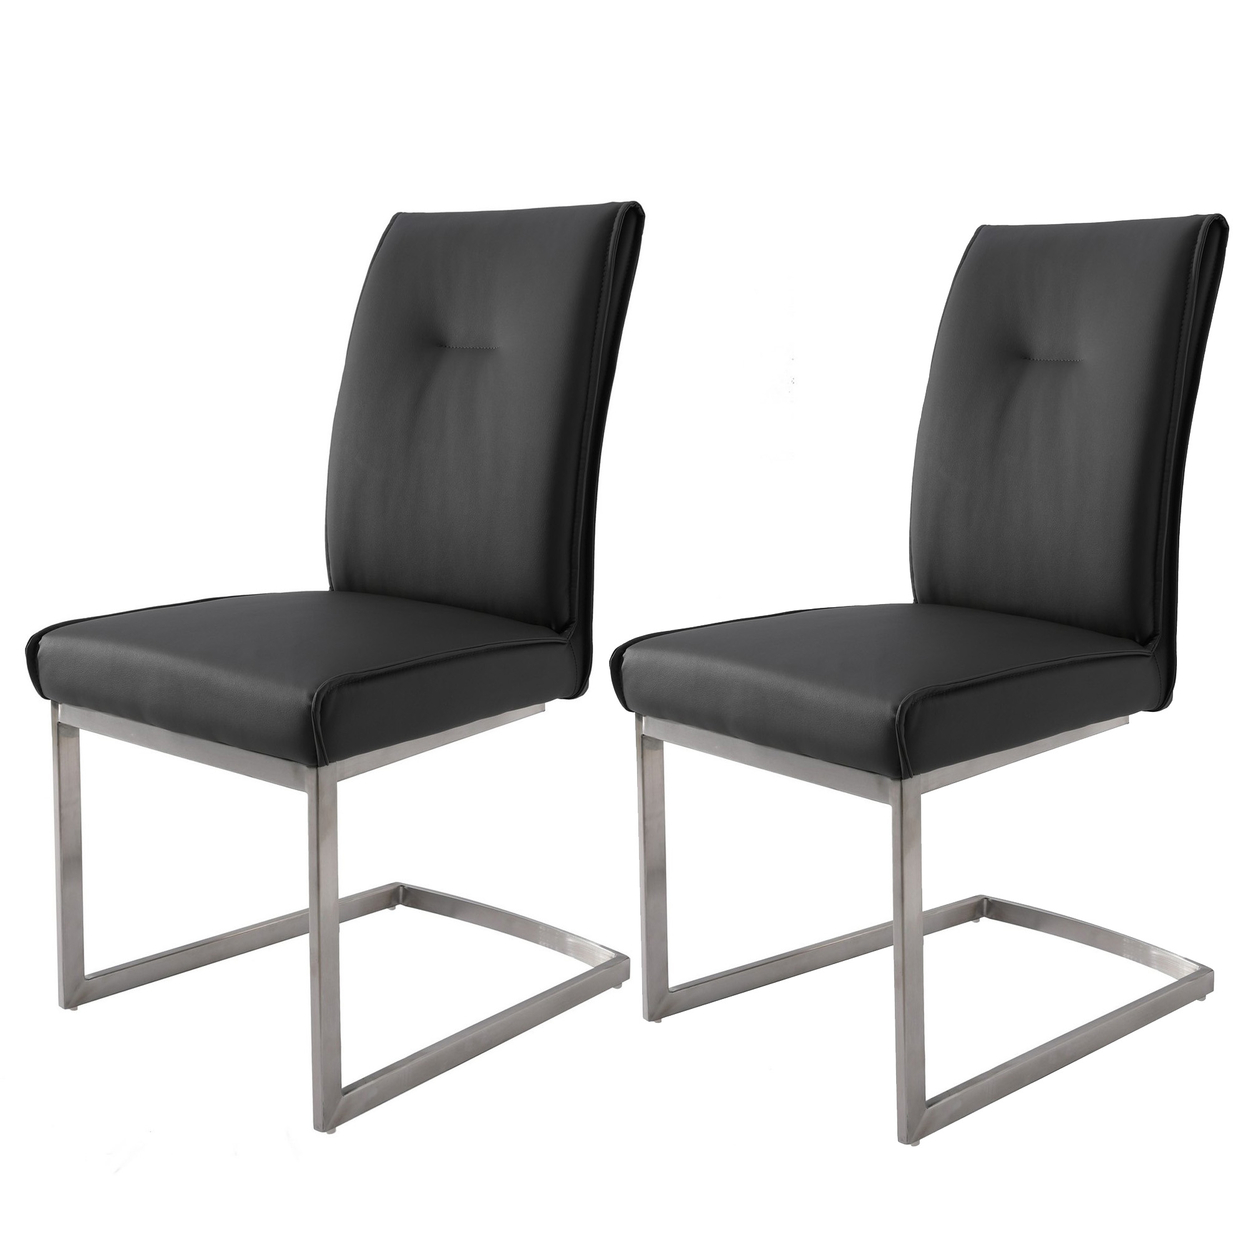 Leatherette Dining Chair With Breuer Style, Set Of 2, Gray- Saltoro Sherpi